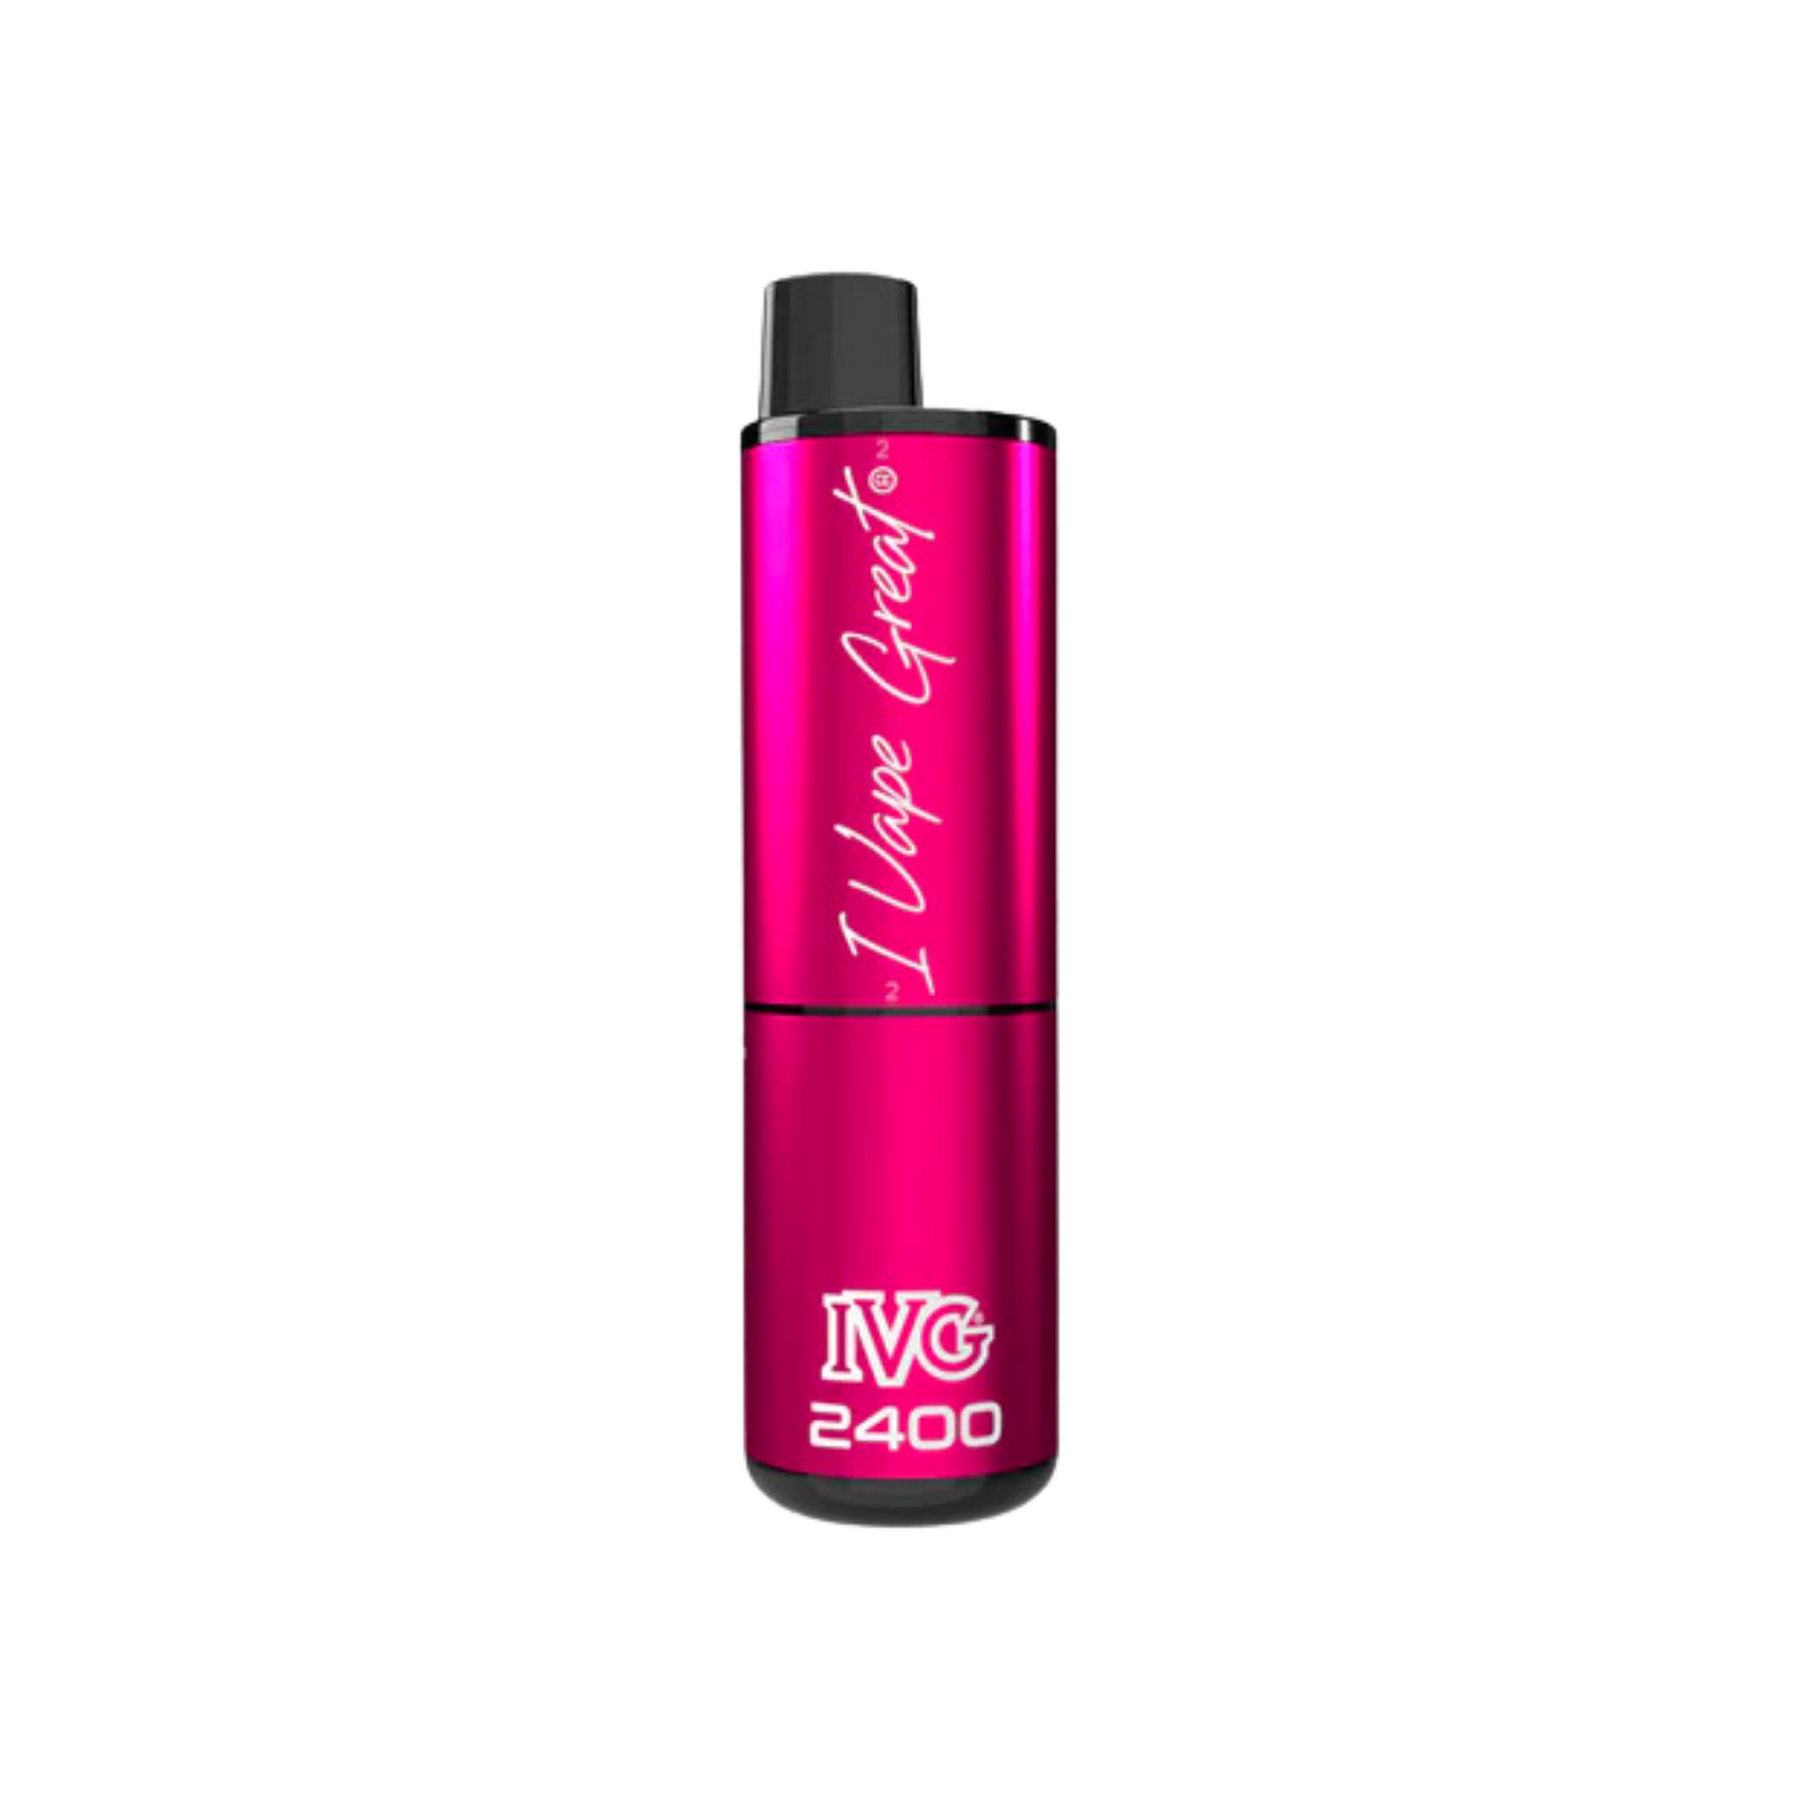 IVG 2400 puff - MULTI PINK Edition 4 in 1